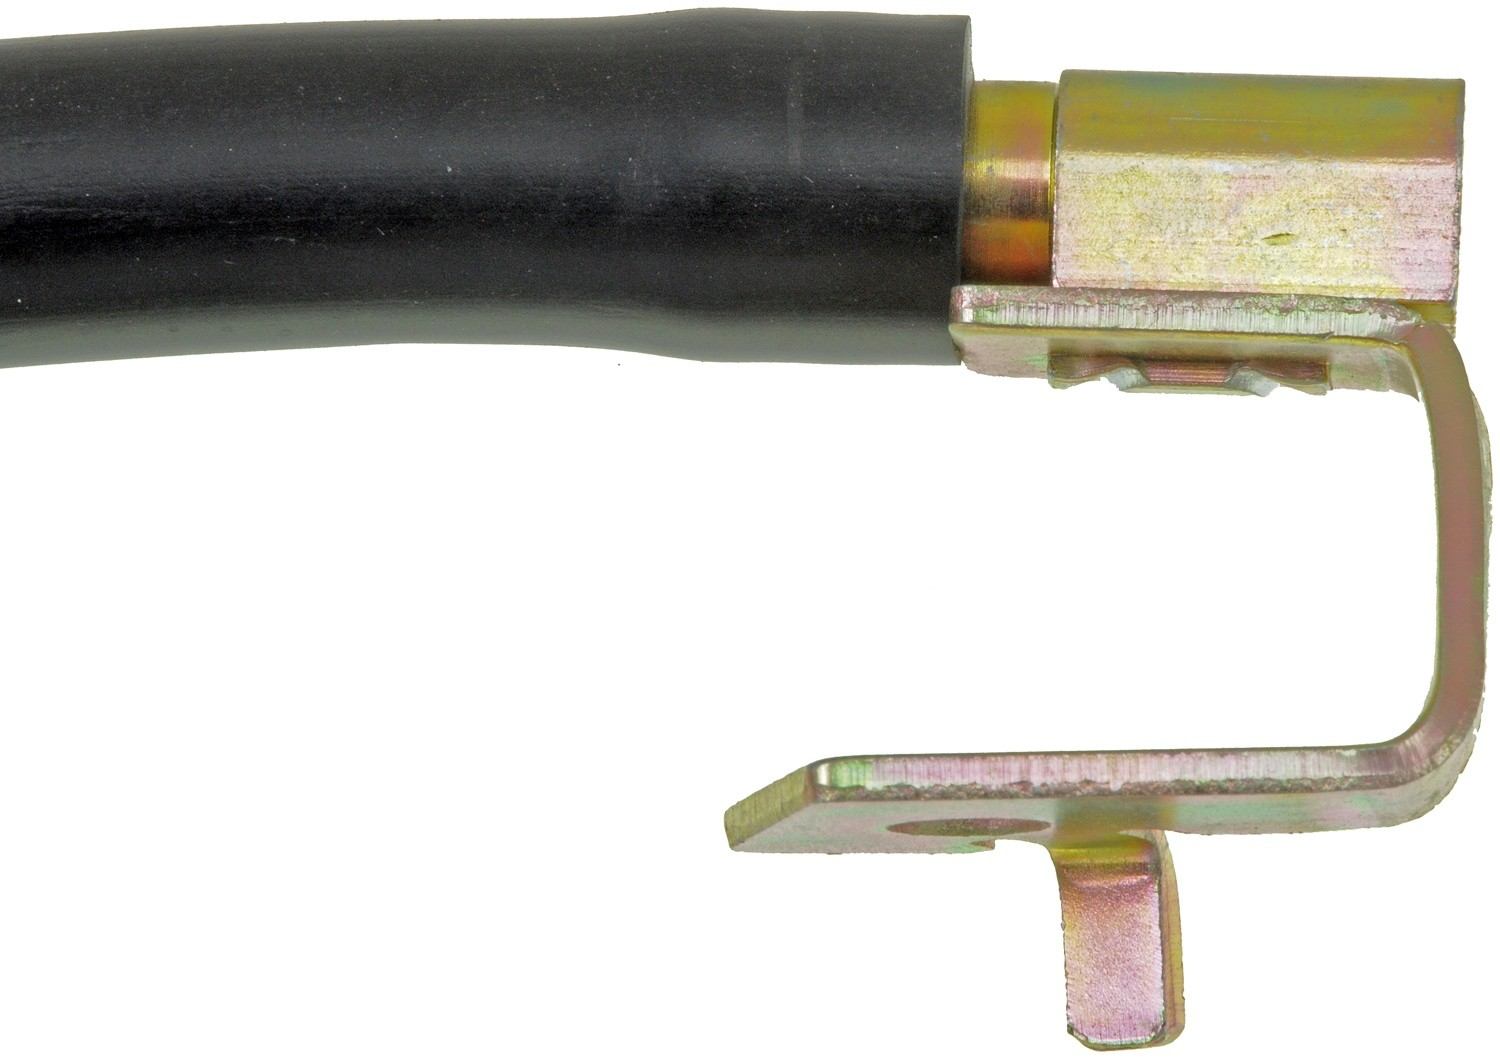 DORMAN - FIRST STOP - Brake Hydraulic Hose (Front Left) - DBP H620507